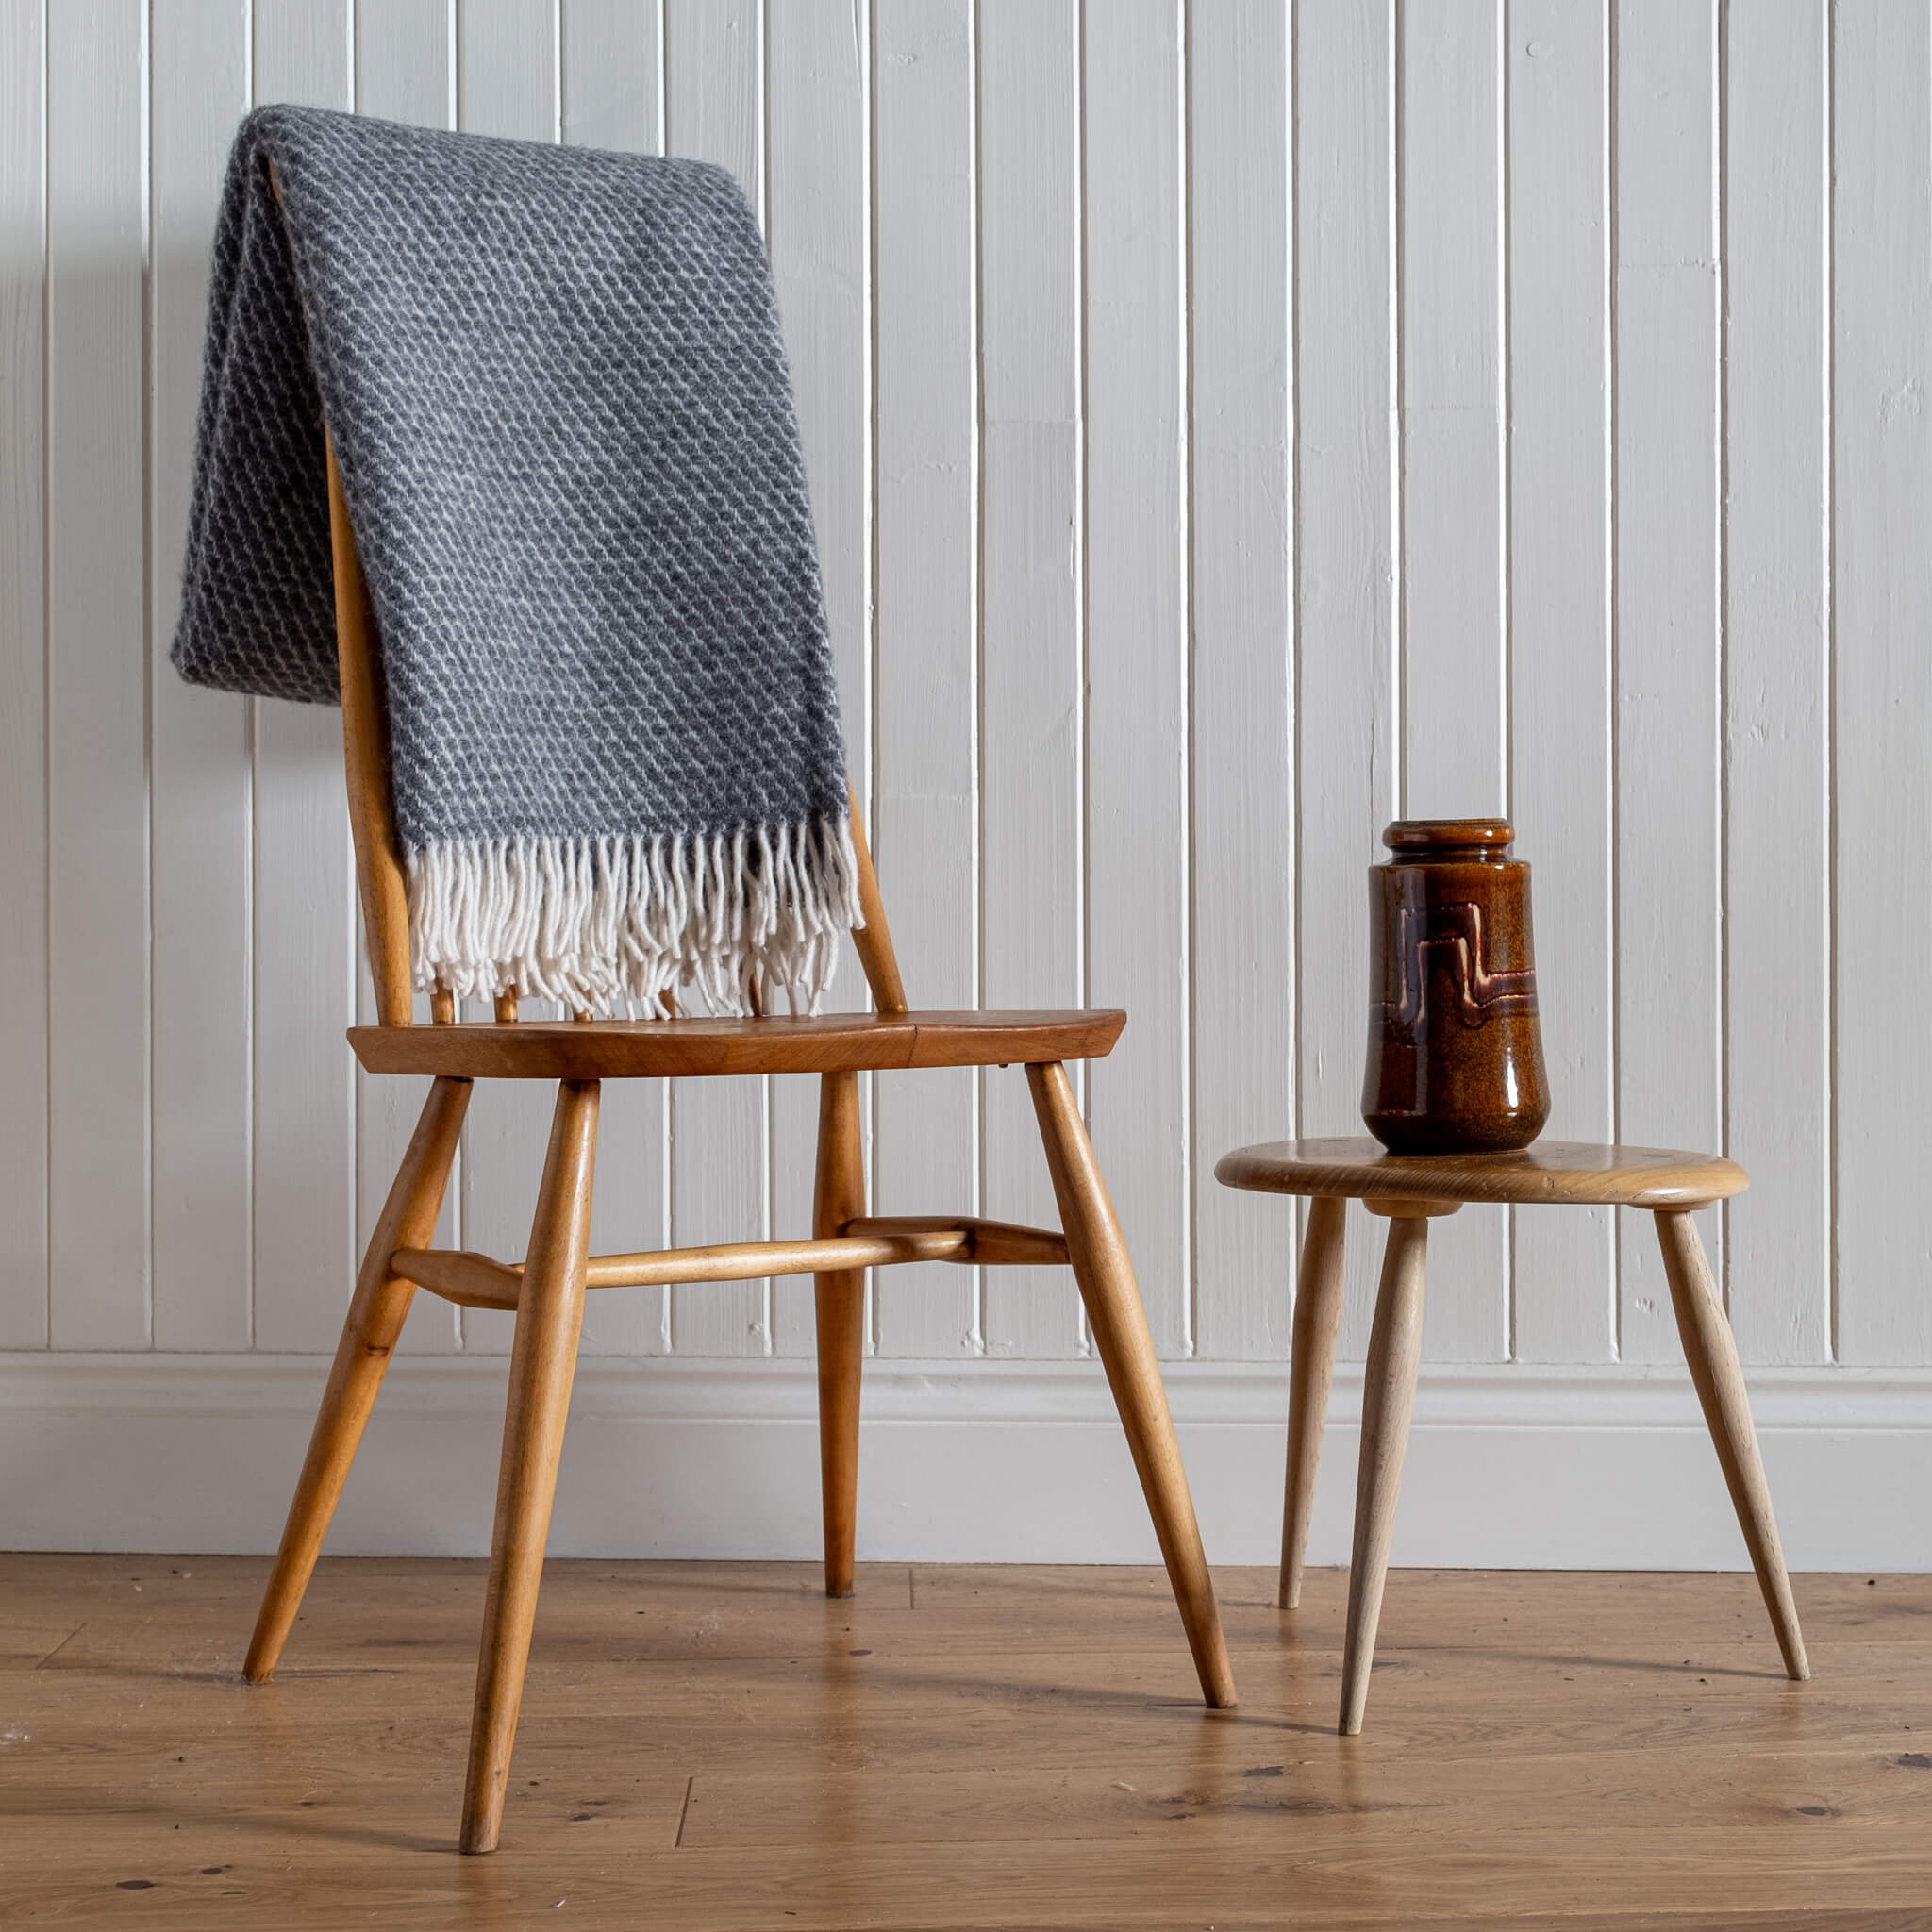 Honeycomb Wool Blanket – Grey, folded on the back of a chair with vintage vase